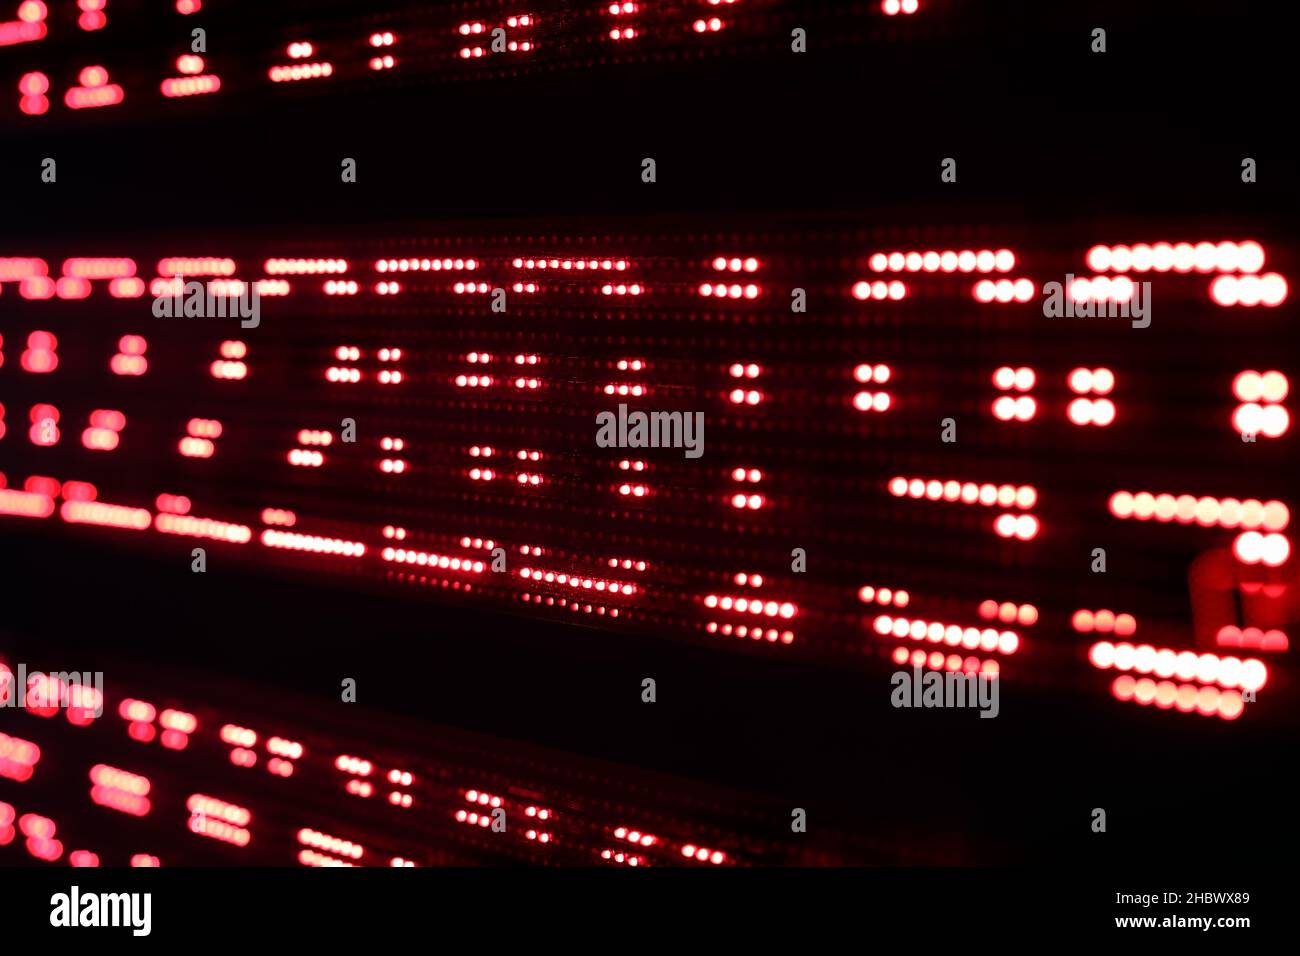 Multi-line scrolling message LED display. Selective focus. Stock Photo